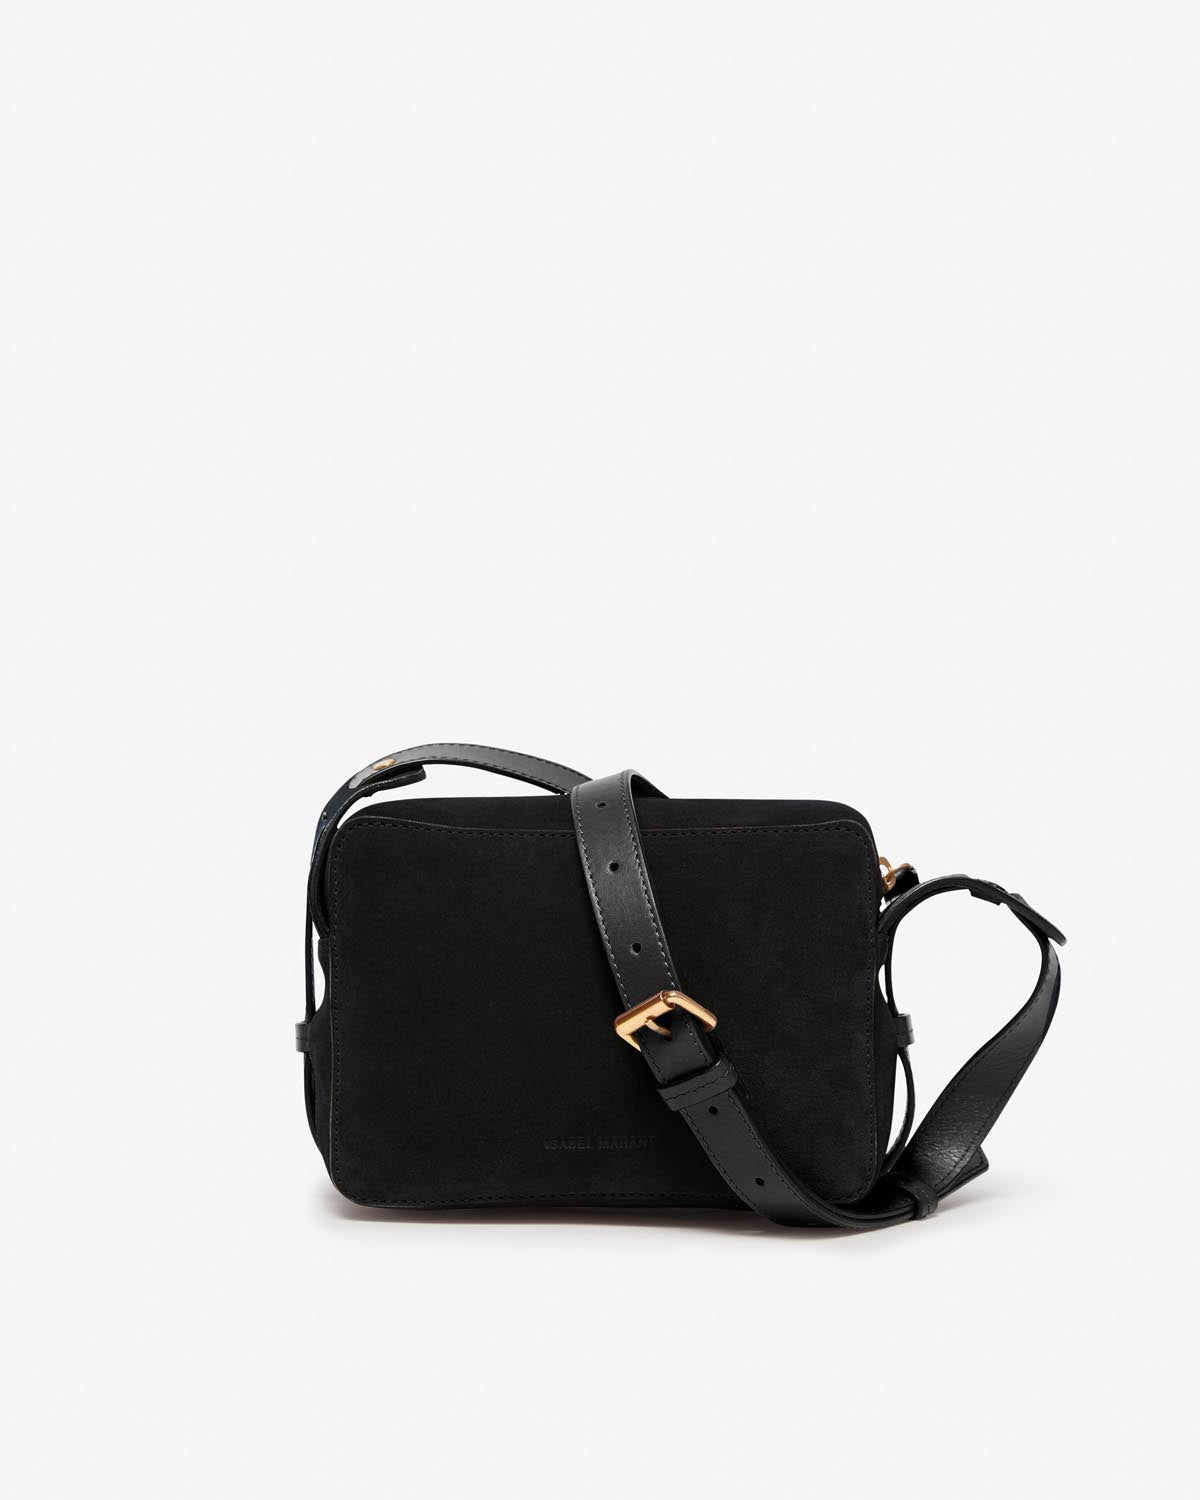 Wasy Bag Woman black | ISABEL MARANT Official online store